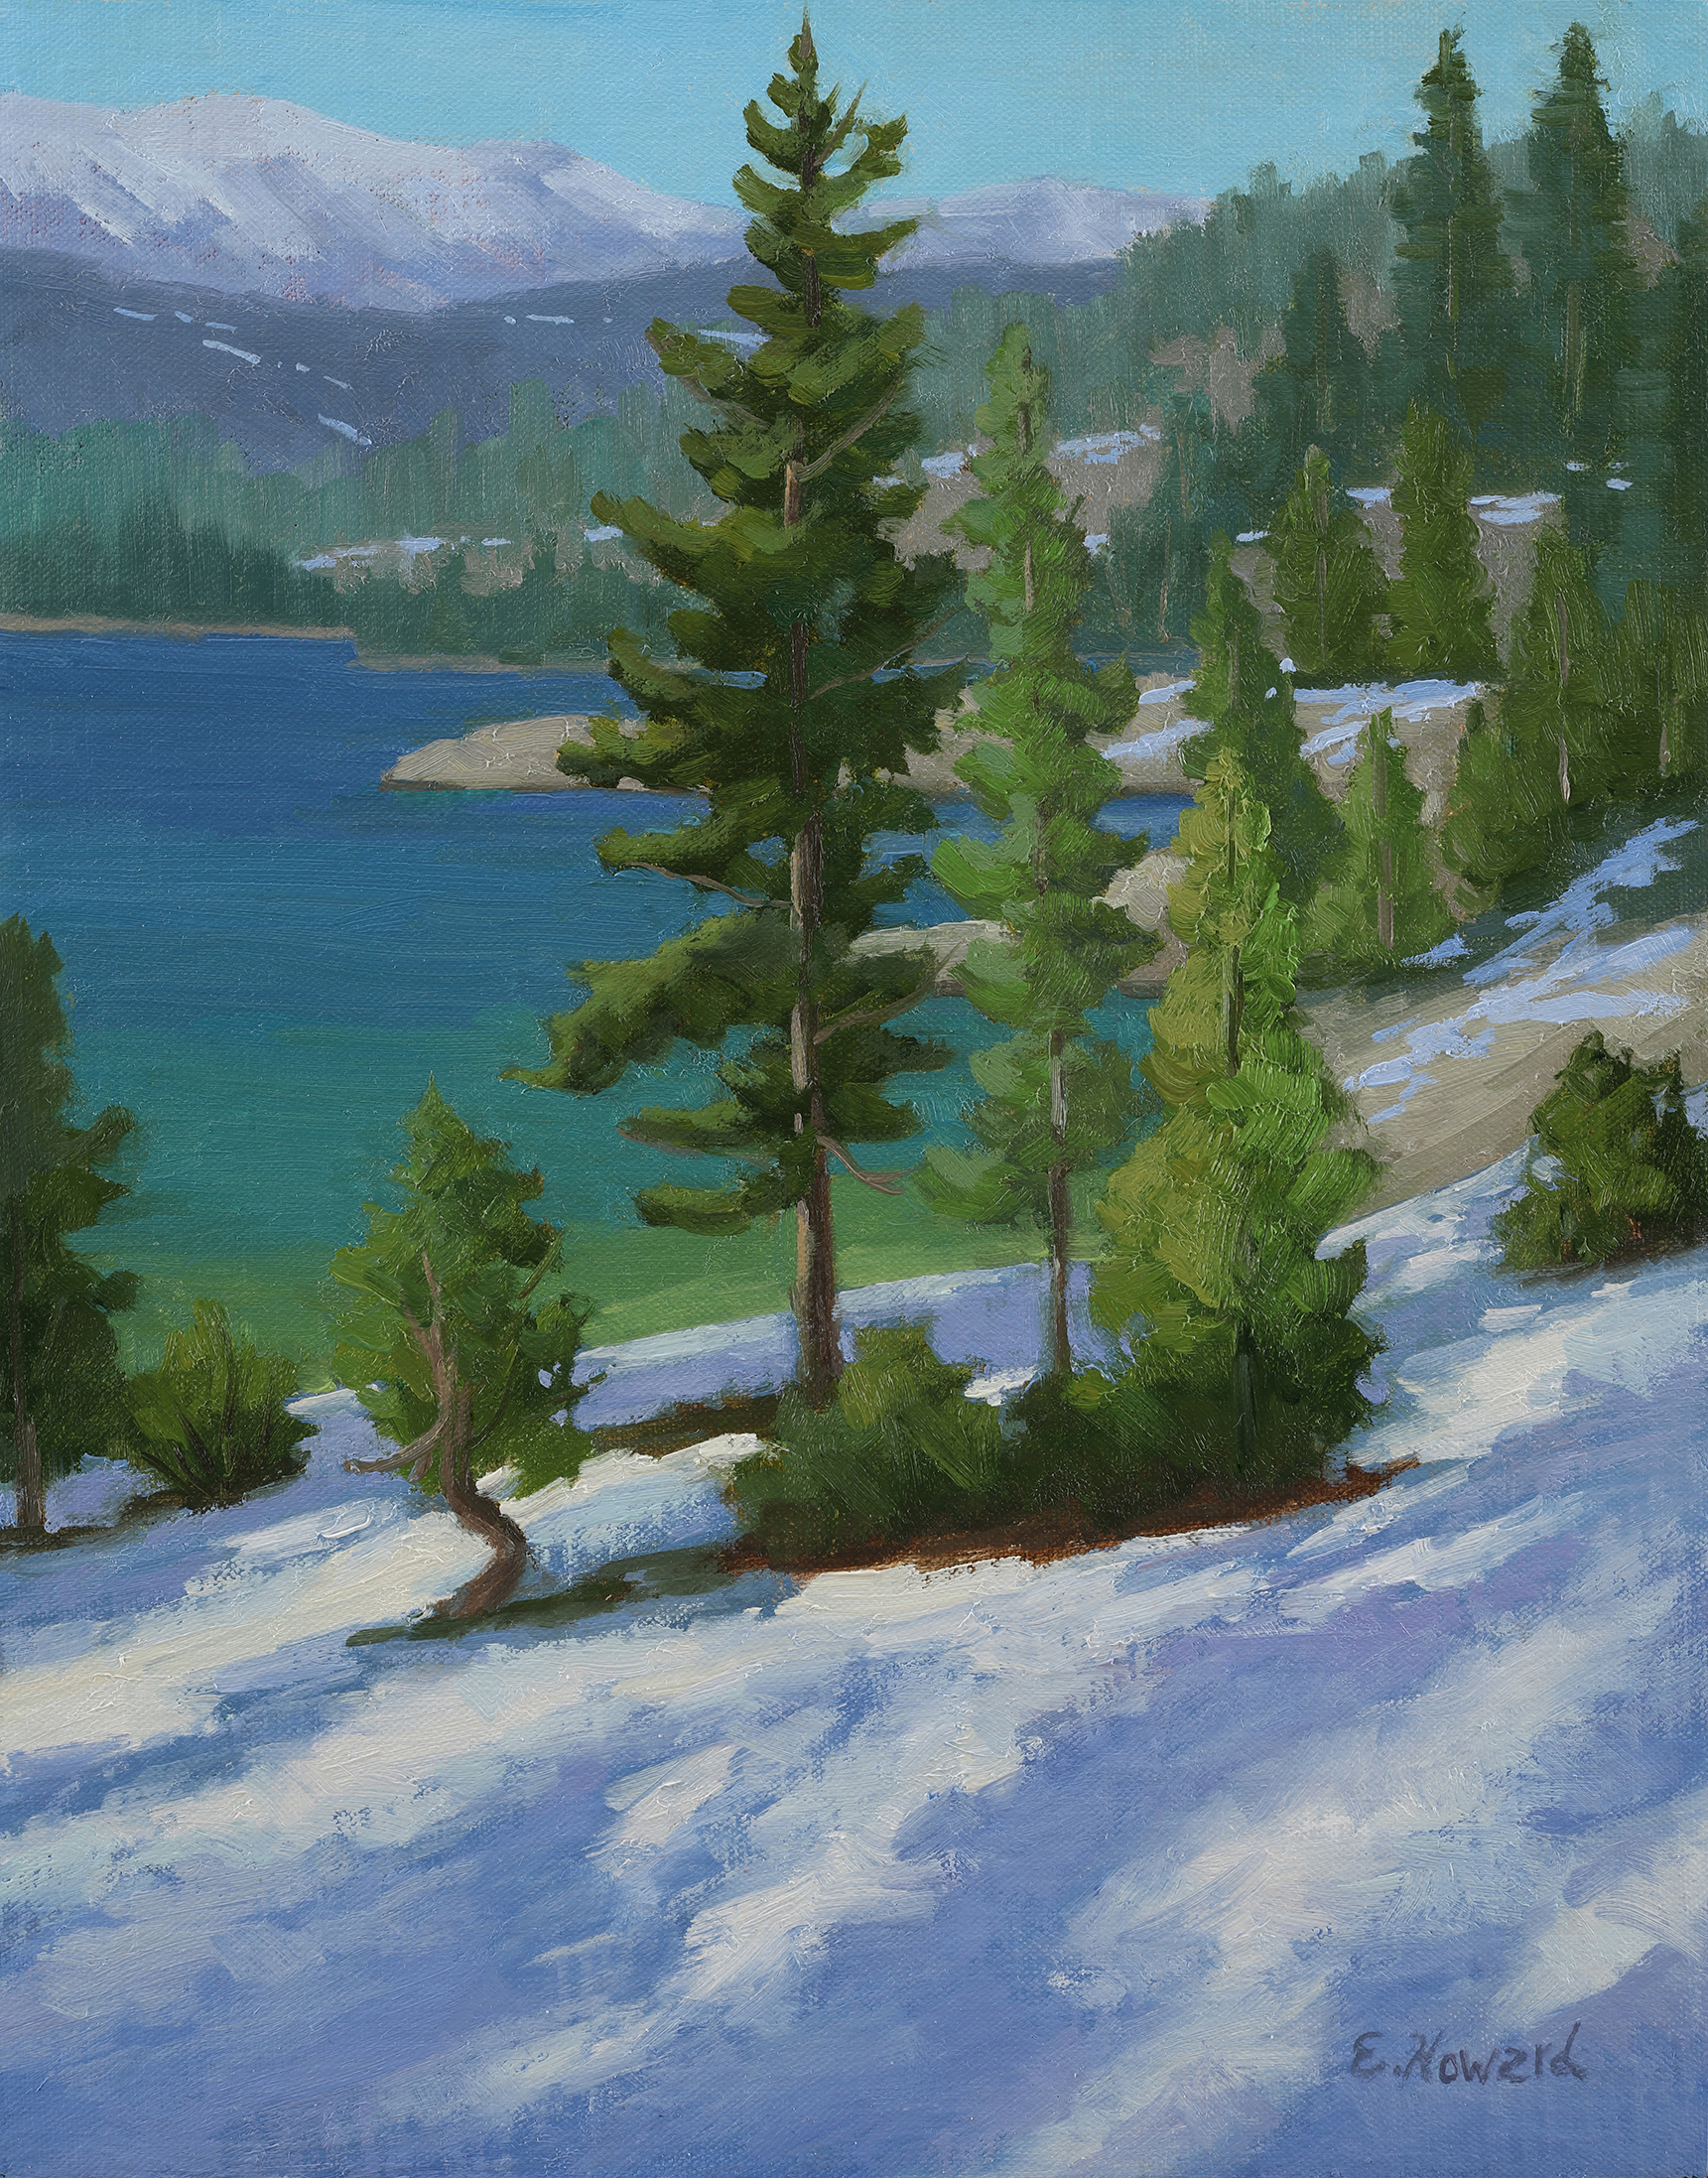 Painting of mountains - 5. Ellen Howard, "Light Dusting," 2022, oil, 11 x 14 in., Available from artist, Plein air and studio